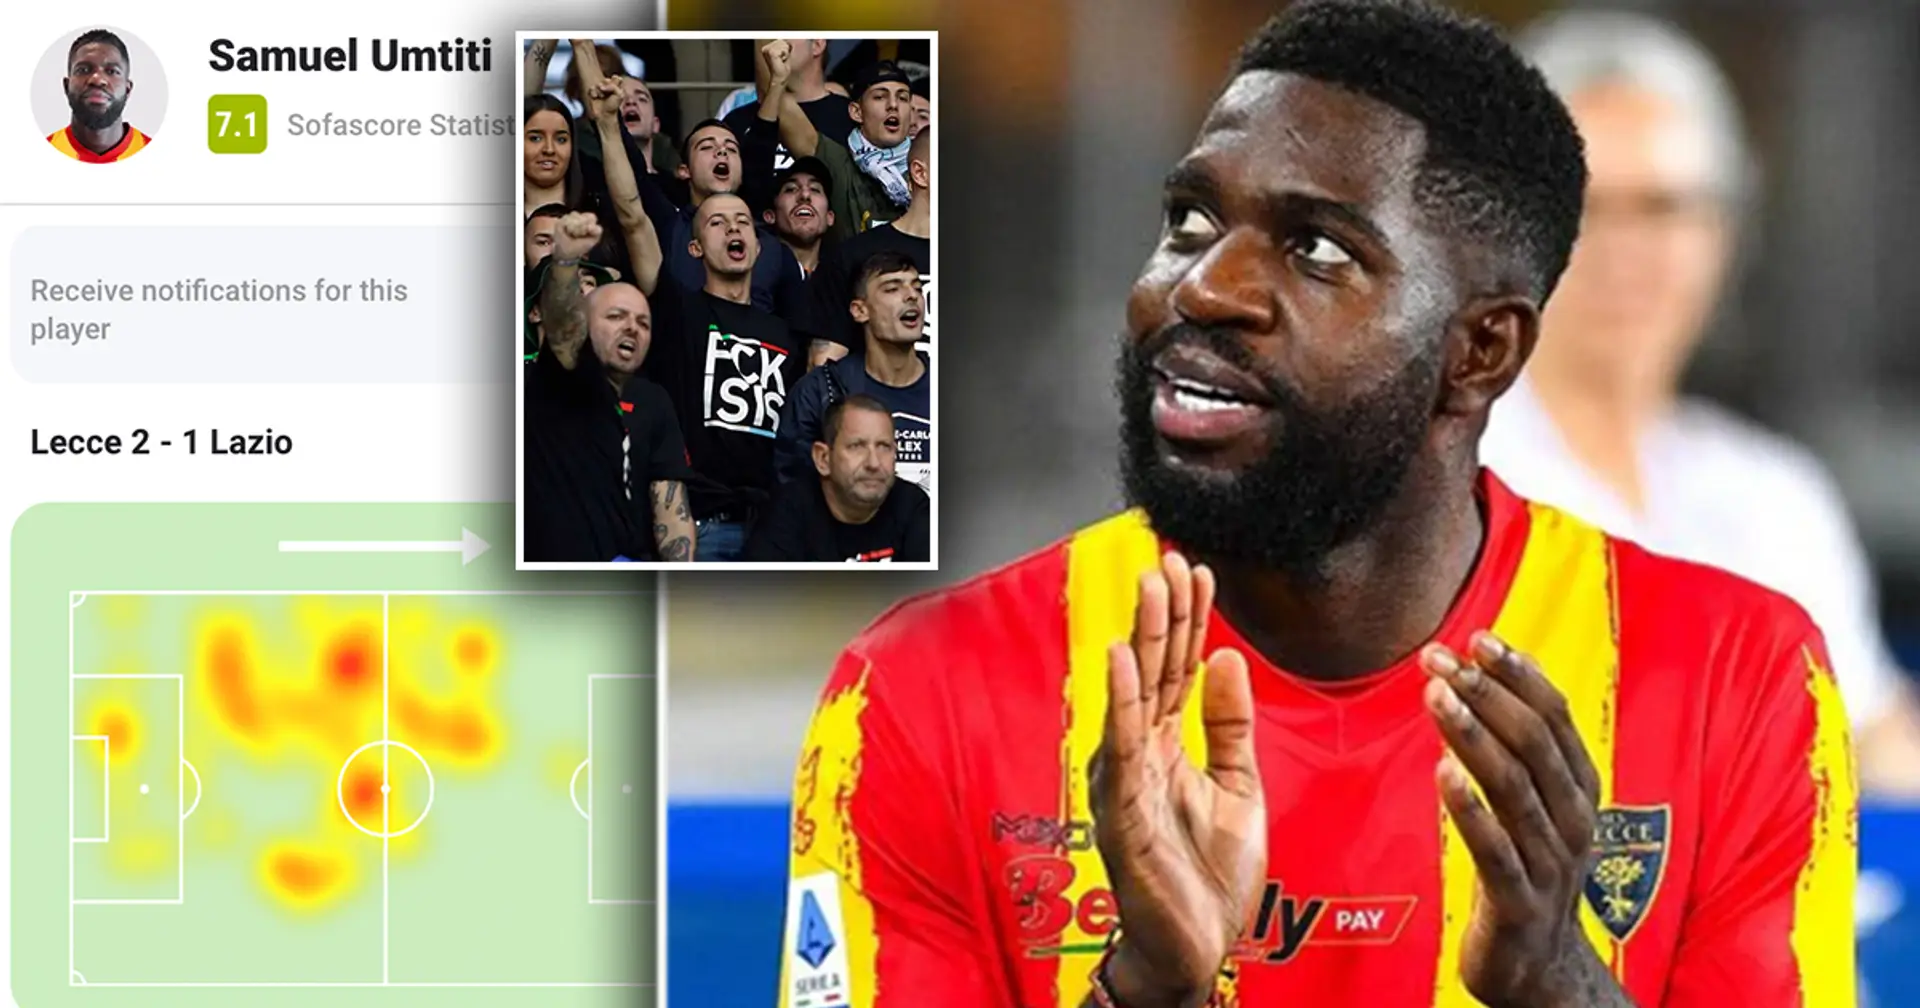 'Reacted like a true champion': Umtiti suffers racial abuse from Lazio fans, asks ref not to stop match